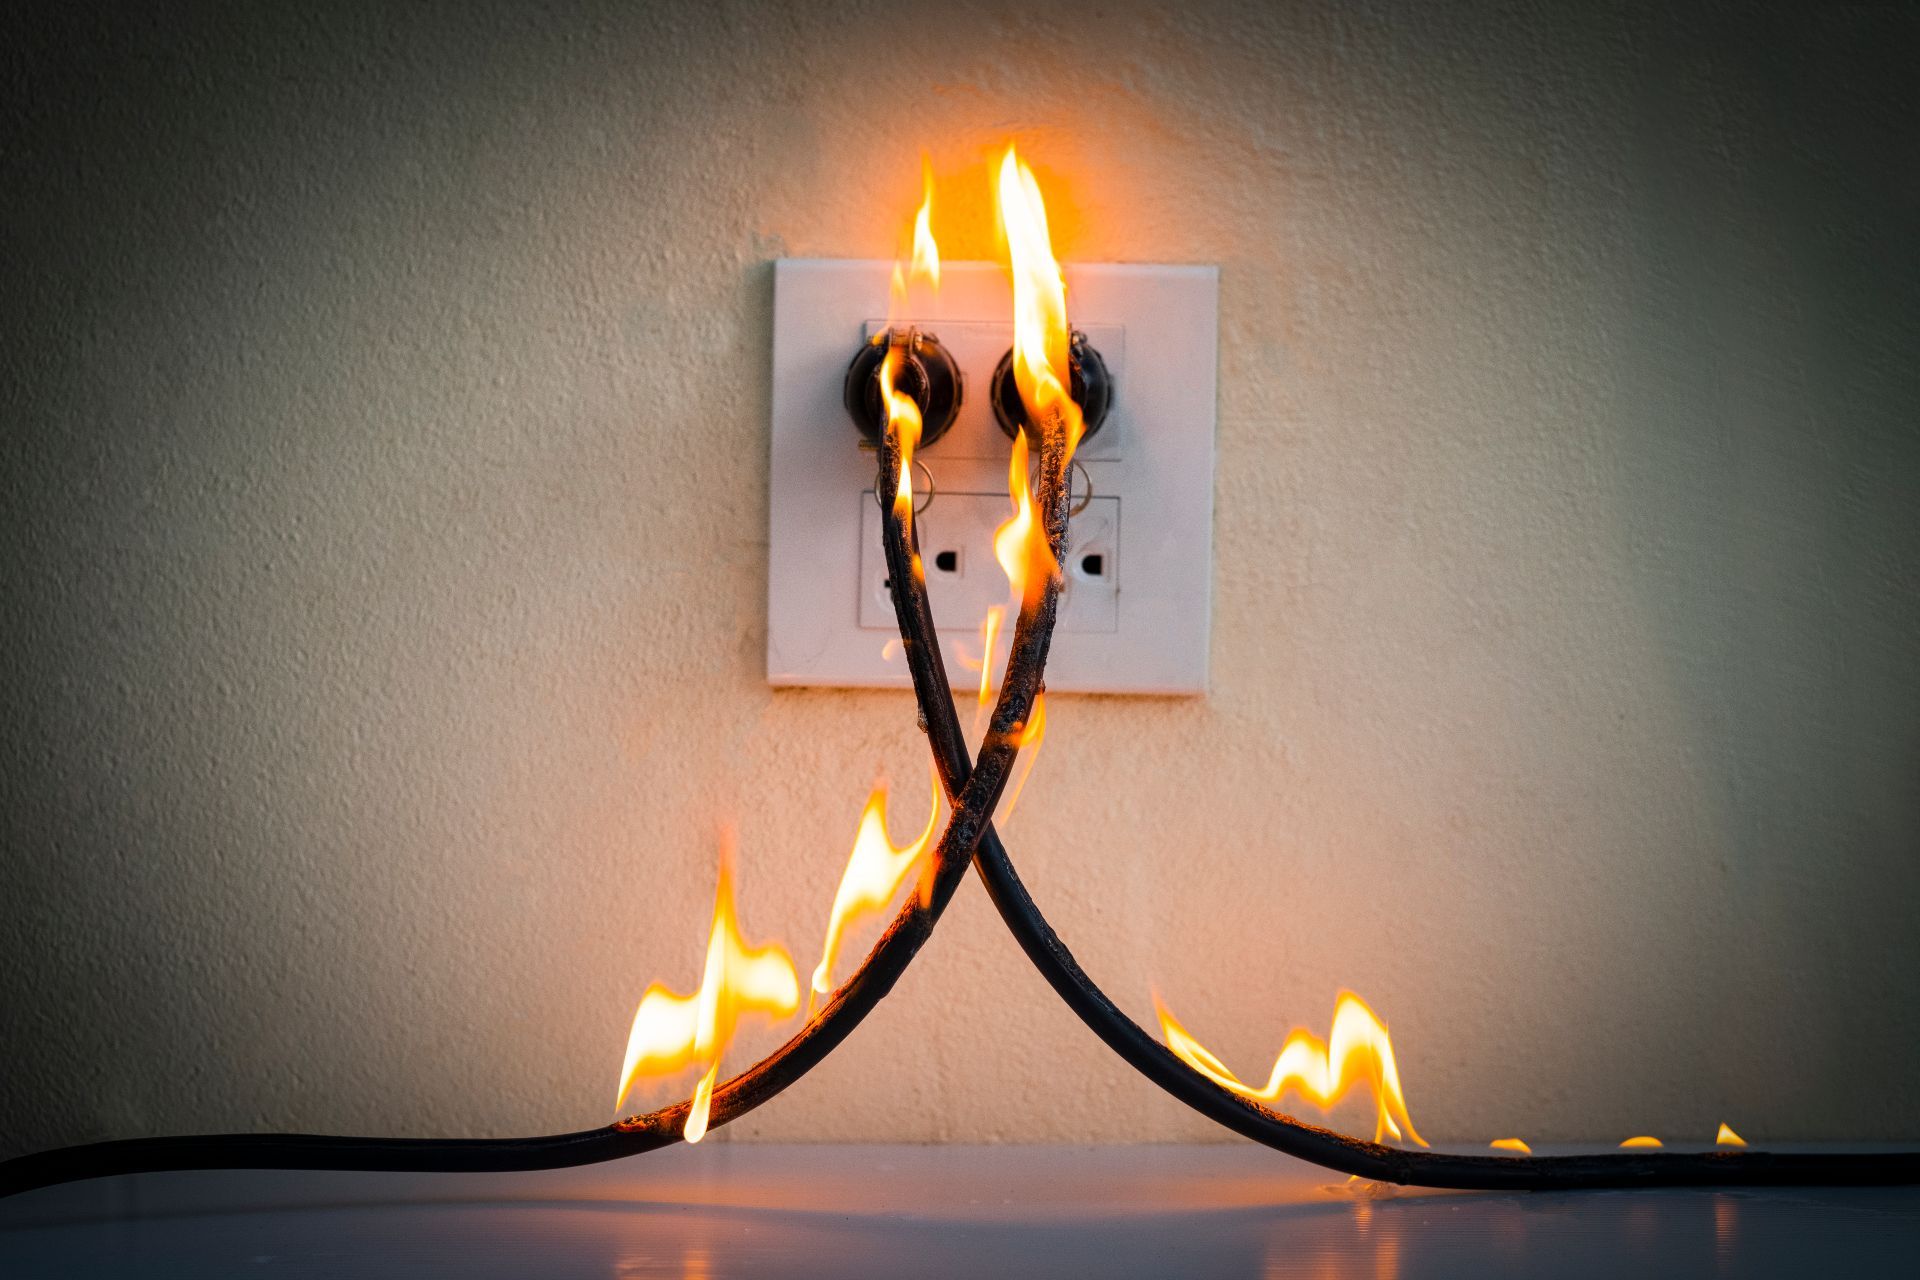 Two crossed power cords on fire, plugged into a wall outlet - extension cord